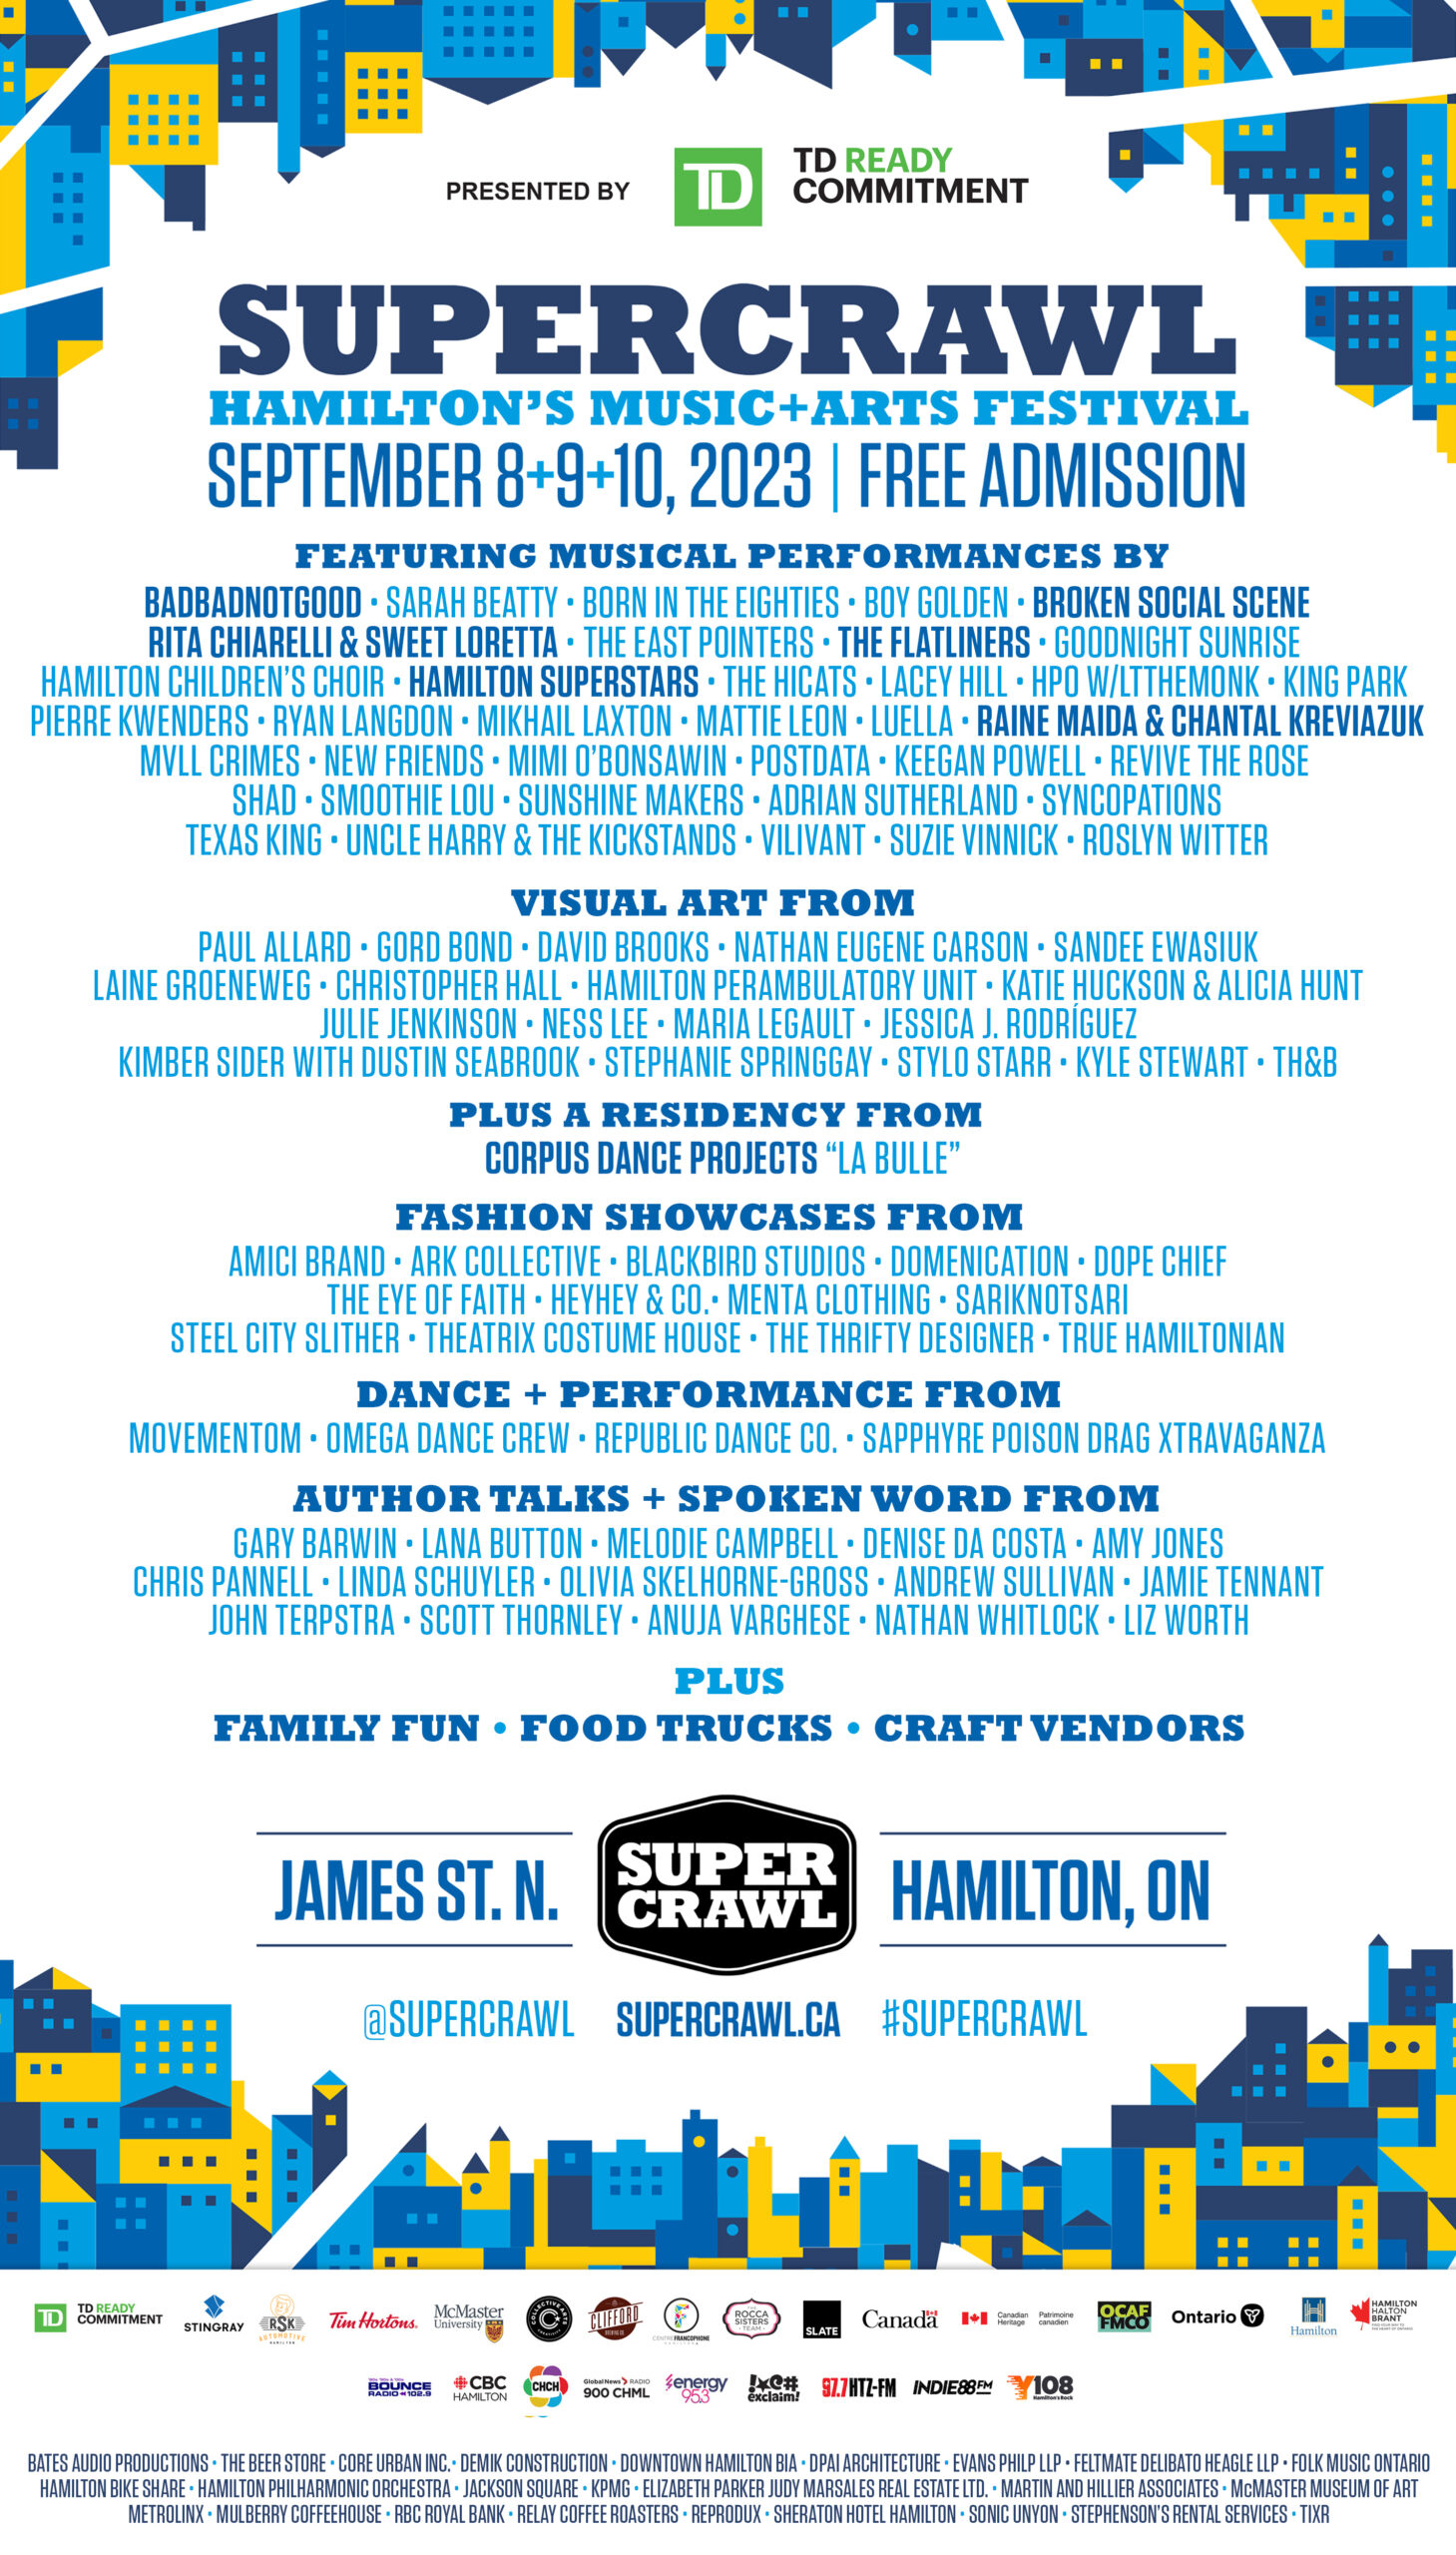 Festival poster framed with an abstract motif of city blocks in light, medium and dark blue with yellow highlights. Poster reads: TD Presents Supercrawl, Hamilton’s Music and Arts Festival, September 8, 9 and 10, 2023. Free admission. Featuring musical performances by BADBADNOTGOOD, Sarah Beatty, Born in the Eighties, Boy Golden, Broken Social Scene, Rita Chiarelli and Sweet Loretta, The East Pointers , The Flatliners, Goodnight Sunrise, Hamilton Children’s Choir, Hamilton Superstars, The HiCats, Lacey Hill, HPO with LTtheMonk, King Park, Pierre Kwenders, Ryan Langdon, Mikhail Laxton, Mattie Leon, Luella, Raine Maida and Chantal Kreviazuk, MVLL CRIMES, New Friends, Mimi O’Bonsawin, Postdata, Keegan Powell, Revive The Rose, Shad, Smoothie Lou, Sunshine Makers, Adrian Sutherland, Syncopations, Texas King, Uncle Harry and The Kickstands, VILIVANT, Suzie Vinnick, and Roslyn Witter. Visual and Performance Art From Paul Allard, Gord Bond, David Brooks, Nathan Eugene Carson, Sandy Ewasiuk, Laine Groeneweg, Christopher Hall, Hamilton Perambulatory Unit, Katie Huckson and Alicia Hunt, Julie Jenkinson, Ness Lee, Maria Legault, Jessica J. Rodríguez, Kimber Sider with Dustin Seabrook, Stephanie Springgay, Stylo Starr, Kyle Stewart, and TH&B. Plus A Residency From Corpus Dance Projects “La Bulle”. Fashion showcases from Amici Brand, Ark Collective, Blackbird Studios, Domenication, Dope Chief, The Eye of Faith, HeyHey and Co., Menta Clothing, sariKNOTsari, Steel City Slither, Theatrix Costume House, The Thrifty Designer, and True Hamiltonian. Dance and Performance from MovementOM, Omega Dance Crew, Republic Dance Co., and Sapphyre Poison Drag Xtravaganza. Author Talks and Spoken Word from Gary Barwin, Lana Button, Melodie Campbell, Denise da Costa, Amy Jones, Chris Pannell, Linda Schuyler, Olivia Skelhorne-Gross, Andrew Sullivan, Jamie Tennant, John Terpstra, Scott Thornley, Anuja Varghese, Nathan Whitlock, and Liz Worth. Plus Family Fun, Food Trucks, and Craft Vendors. Below this text is the Supercrawl logo, flanked by the words James St. N. and Hamilton, ON. Festival website https://supercrawl.ca/ is listed below the logo, and is flanked by the social media handle @supercrawl and event hashtag #supercrawl. Festival sponsors arrayed across the bottom of the poster appear on three tiers. The top tier is made up of the logos of TD Bank Group, RSK Automotive and Collision, Stingray Music, Tim Hortons, McMaster University, Collective Arts Brewing, Clifford Brewing Co., Centre Francophone Hamilton, The Rocca Sisters Team, Slate Asset Management, Building Communities, Canadian Heritage, Ontario Cultural Attractions Fund, Celebrate Ontario, City of Hamilton, and The Heart of Ontario. The second tier is made up of logos of media partners 102.9 BounceFM, CBC Hamilton, CHCH, AM 900 CHML, Energy 95.3, Exclaim!, 97.7 HTZ-FM, Indie 88FM, and Y108. The final tier is text-only and acknowledges Bates Audio Productions, The Beer Store, Core Urban Inc., Demik Construction, Downtown Hamilton BIA, DPAI Architects, Evans Philp LLP, Feltmate Delibato Heagle LLP, Folk Music Ontario, Hamilton Bike Share, Hamilton Philharmonic Orchestra, Jackson Square, KPMG , Elizabeth Parker Judy Marsales Real Estate Ltd., Martin and Hillier Associates, McMaster Museum of Art, Metrolinx, Mulberry Coffeehouse, RBC Royal Bank, Relay Coffee Roasters, Reprodux, Sheraton Hotel Hamilton, Sonic Unyon, Stephenson’s Rental Services, and Tixr.